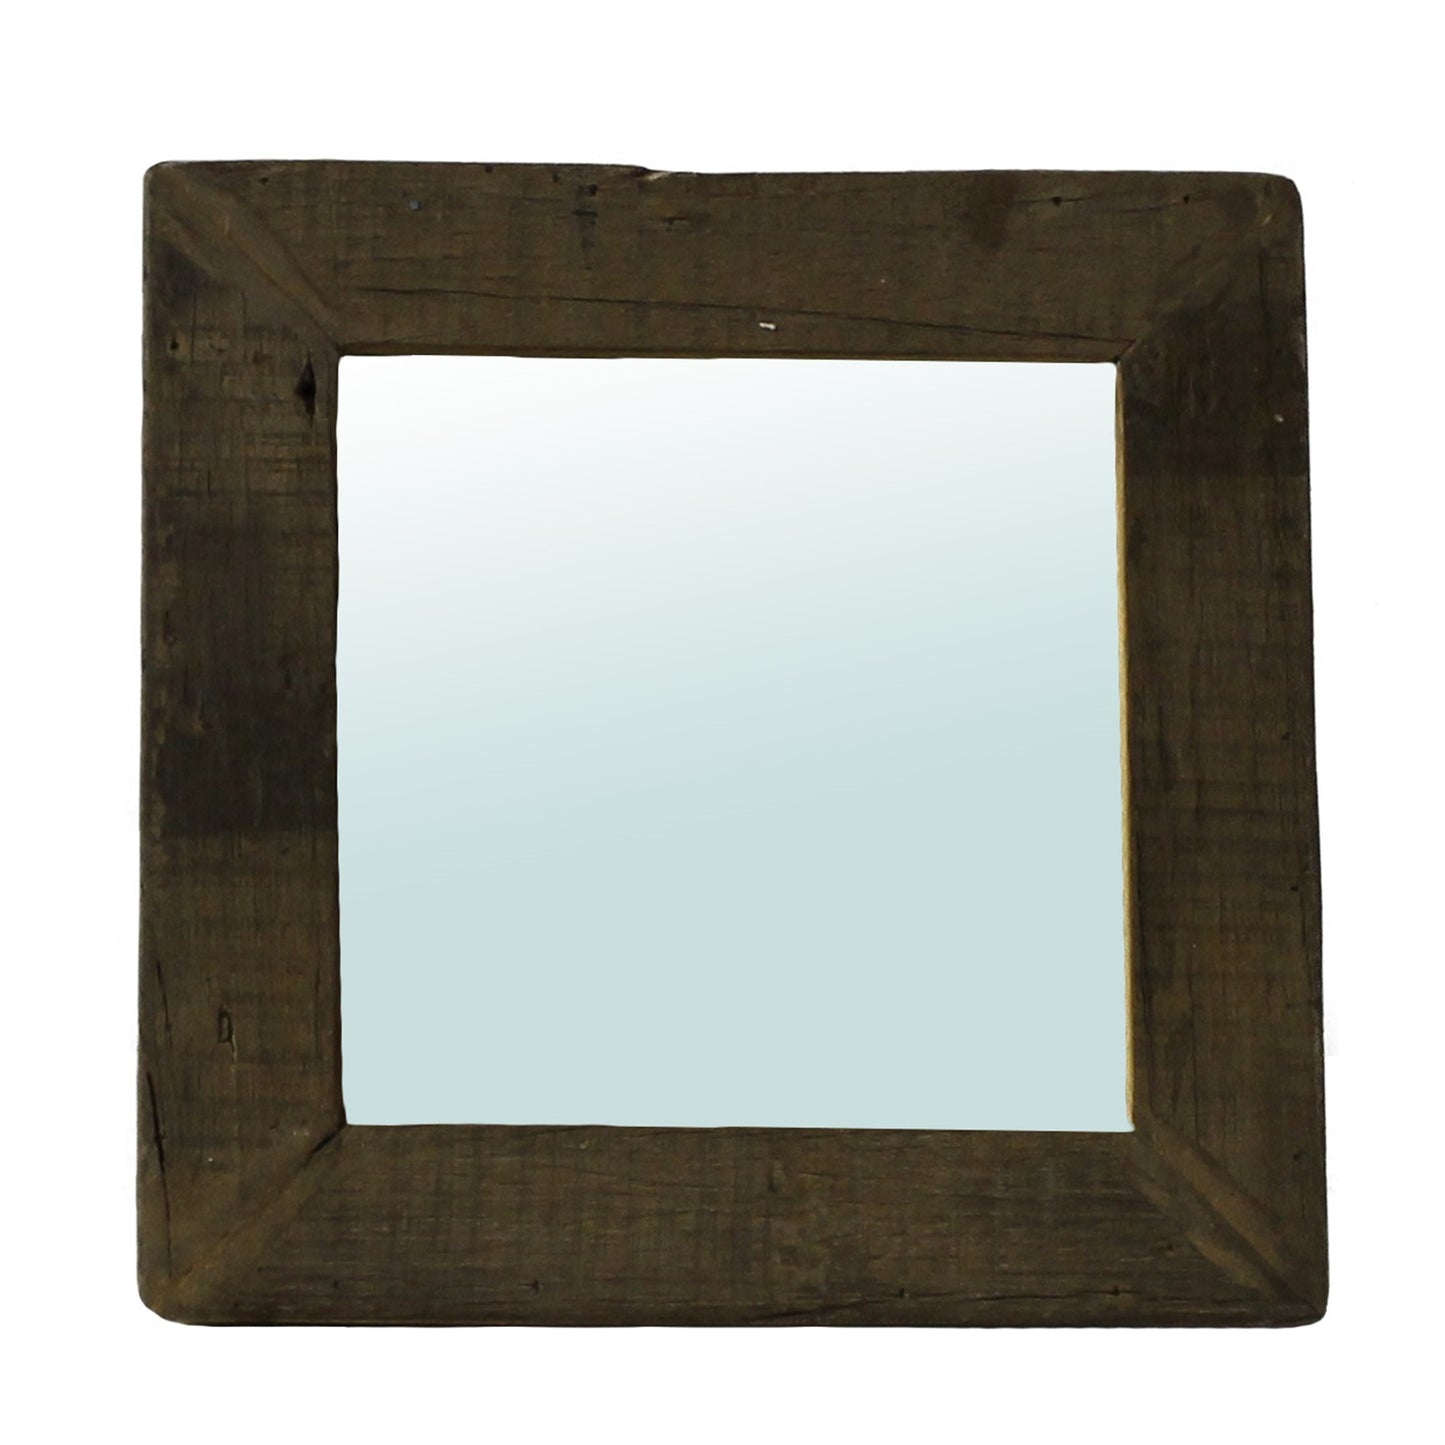 16" Brown Square Framed Accent Mirror